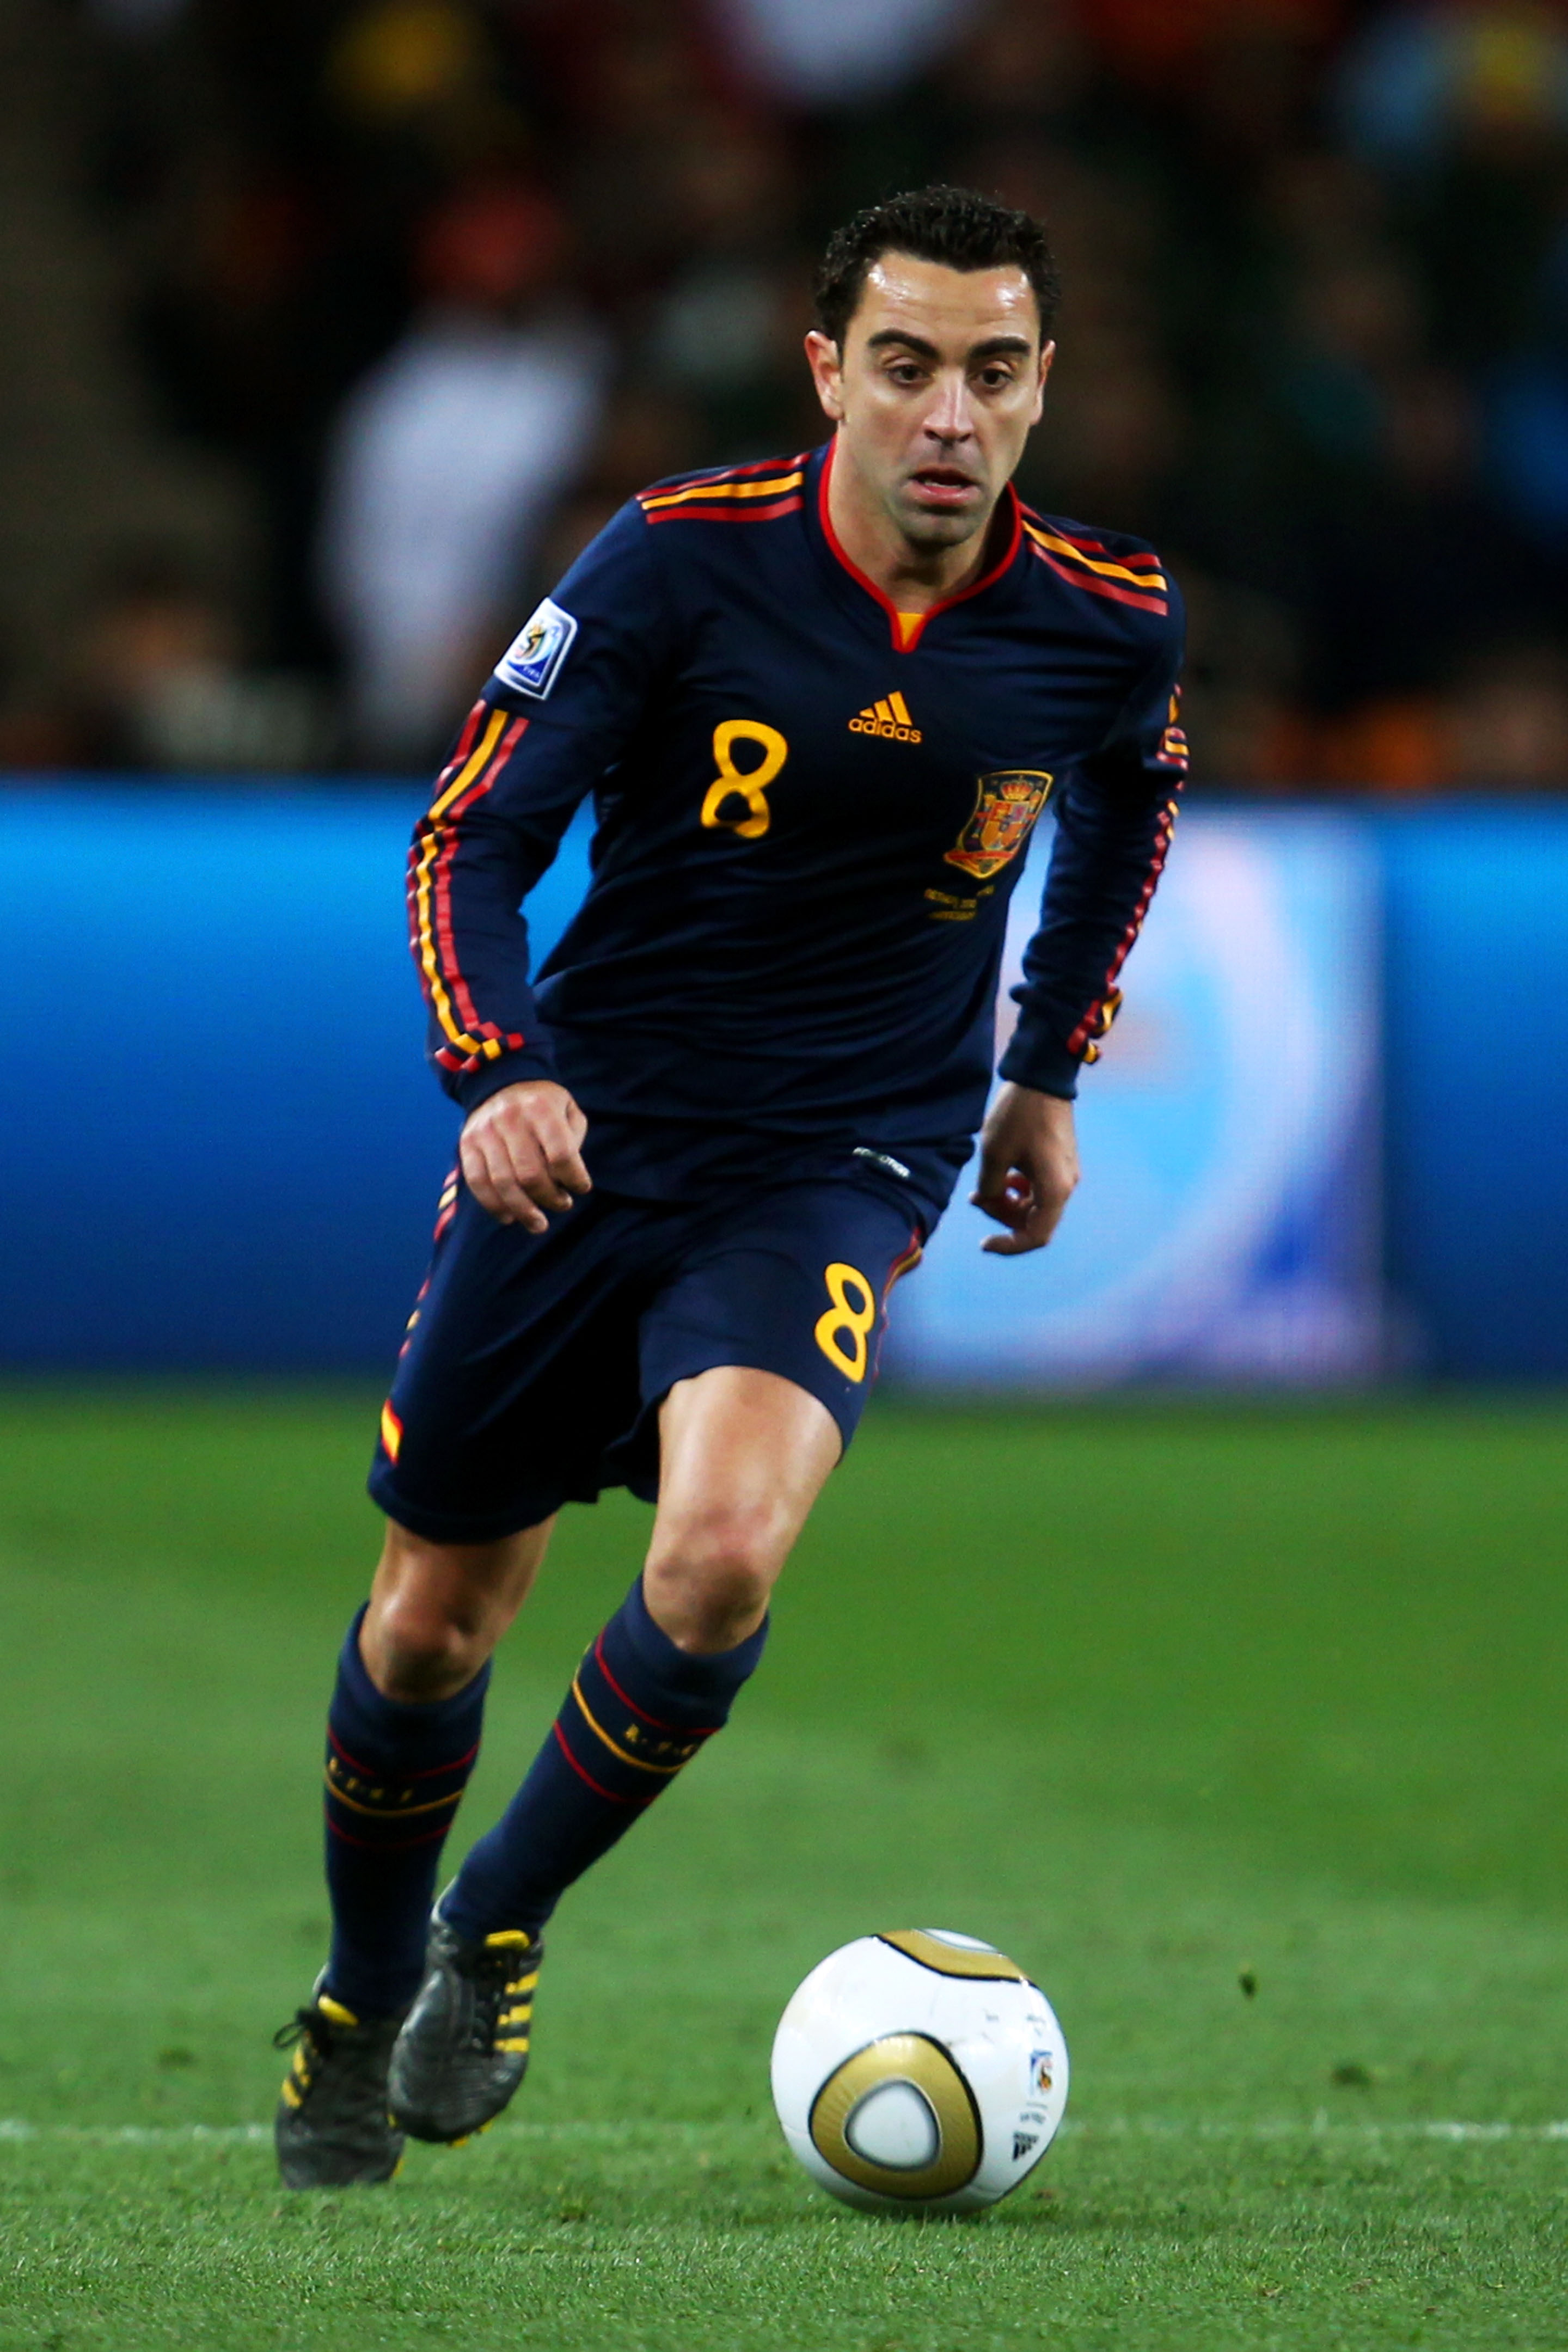 JOHANNESBURG, SOUTH AFRICA - JULY 11:  Xavi Hernandez of Spain runs with the ball during the 2010 FIFA World Cup South Africa Final match between Netherlands and Spain at Soccer City Stadium on July 11, 2010 in Johannesburg, South Africa.  (Photo by Lars